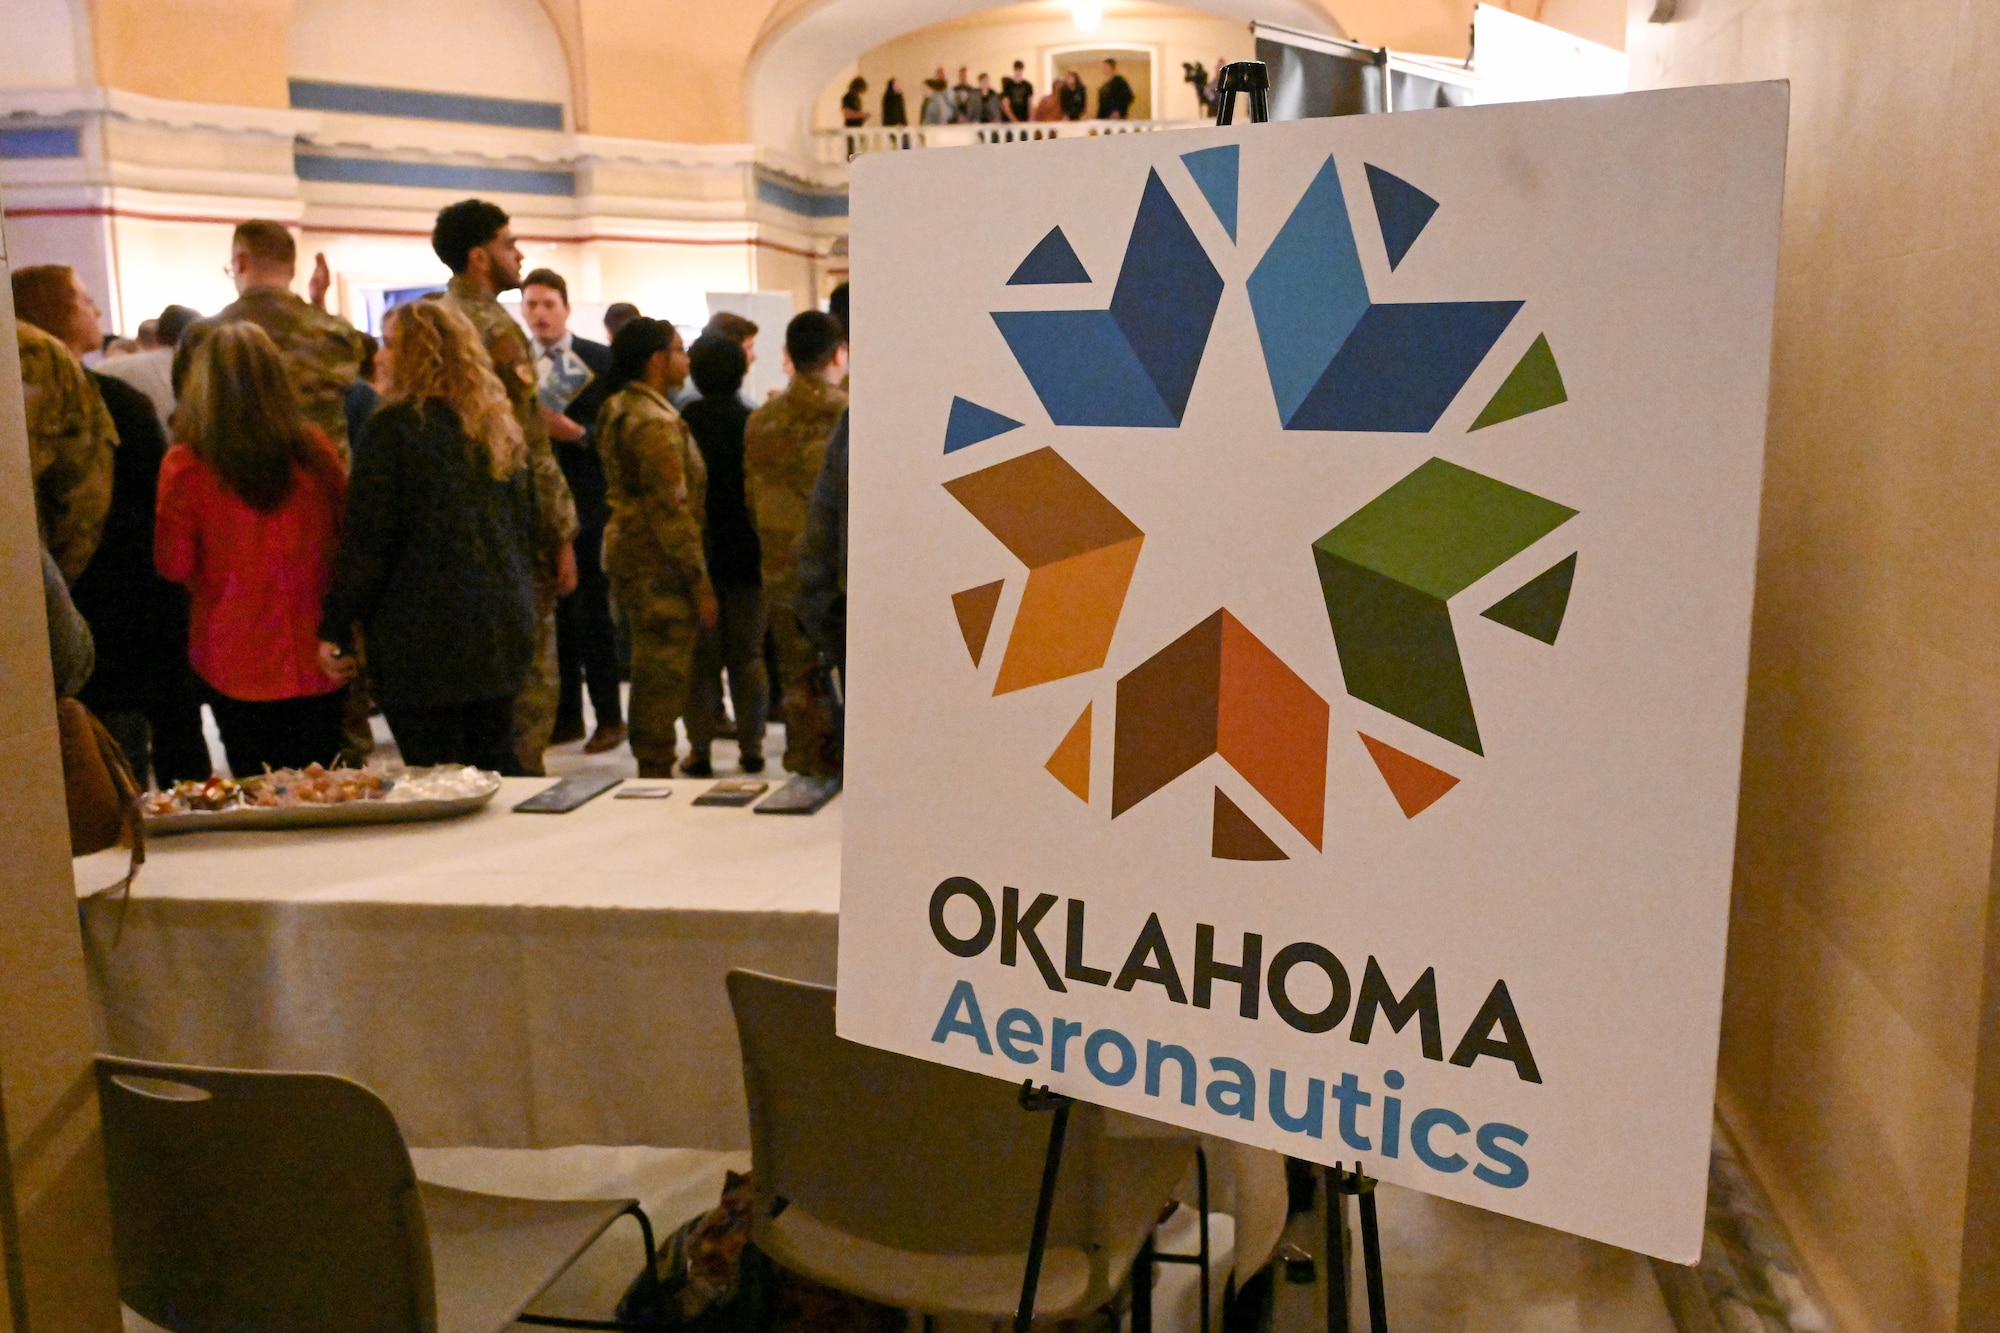 A sign is displayed at the 2023 AERO Oklahoma Aviation, Aerospace and Defense Awareness expo at the Oklahoma State Capitol, March 22, 2023. More than 50 exhibitors and companies participated in this annual event. (U.S. Air Force photo by Senior Airman Trenton Jancze)